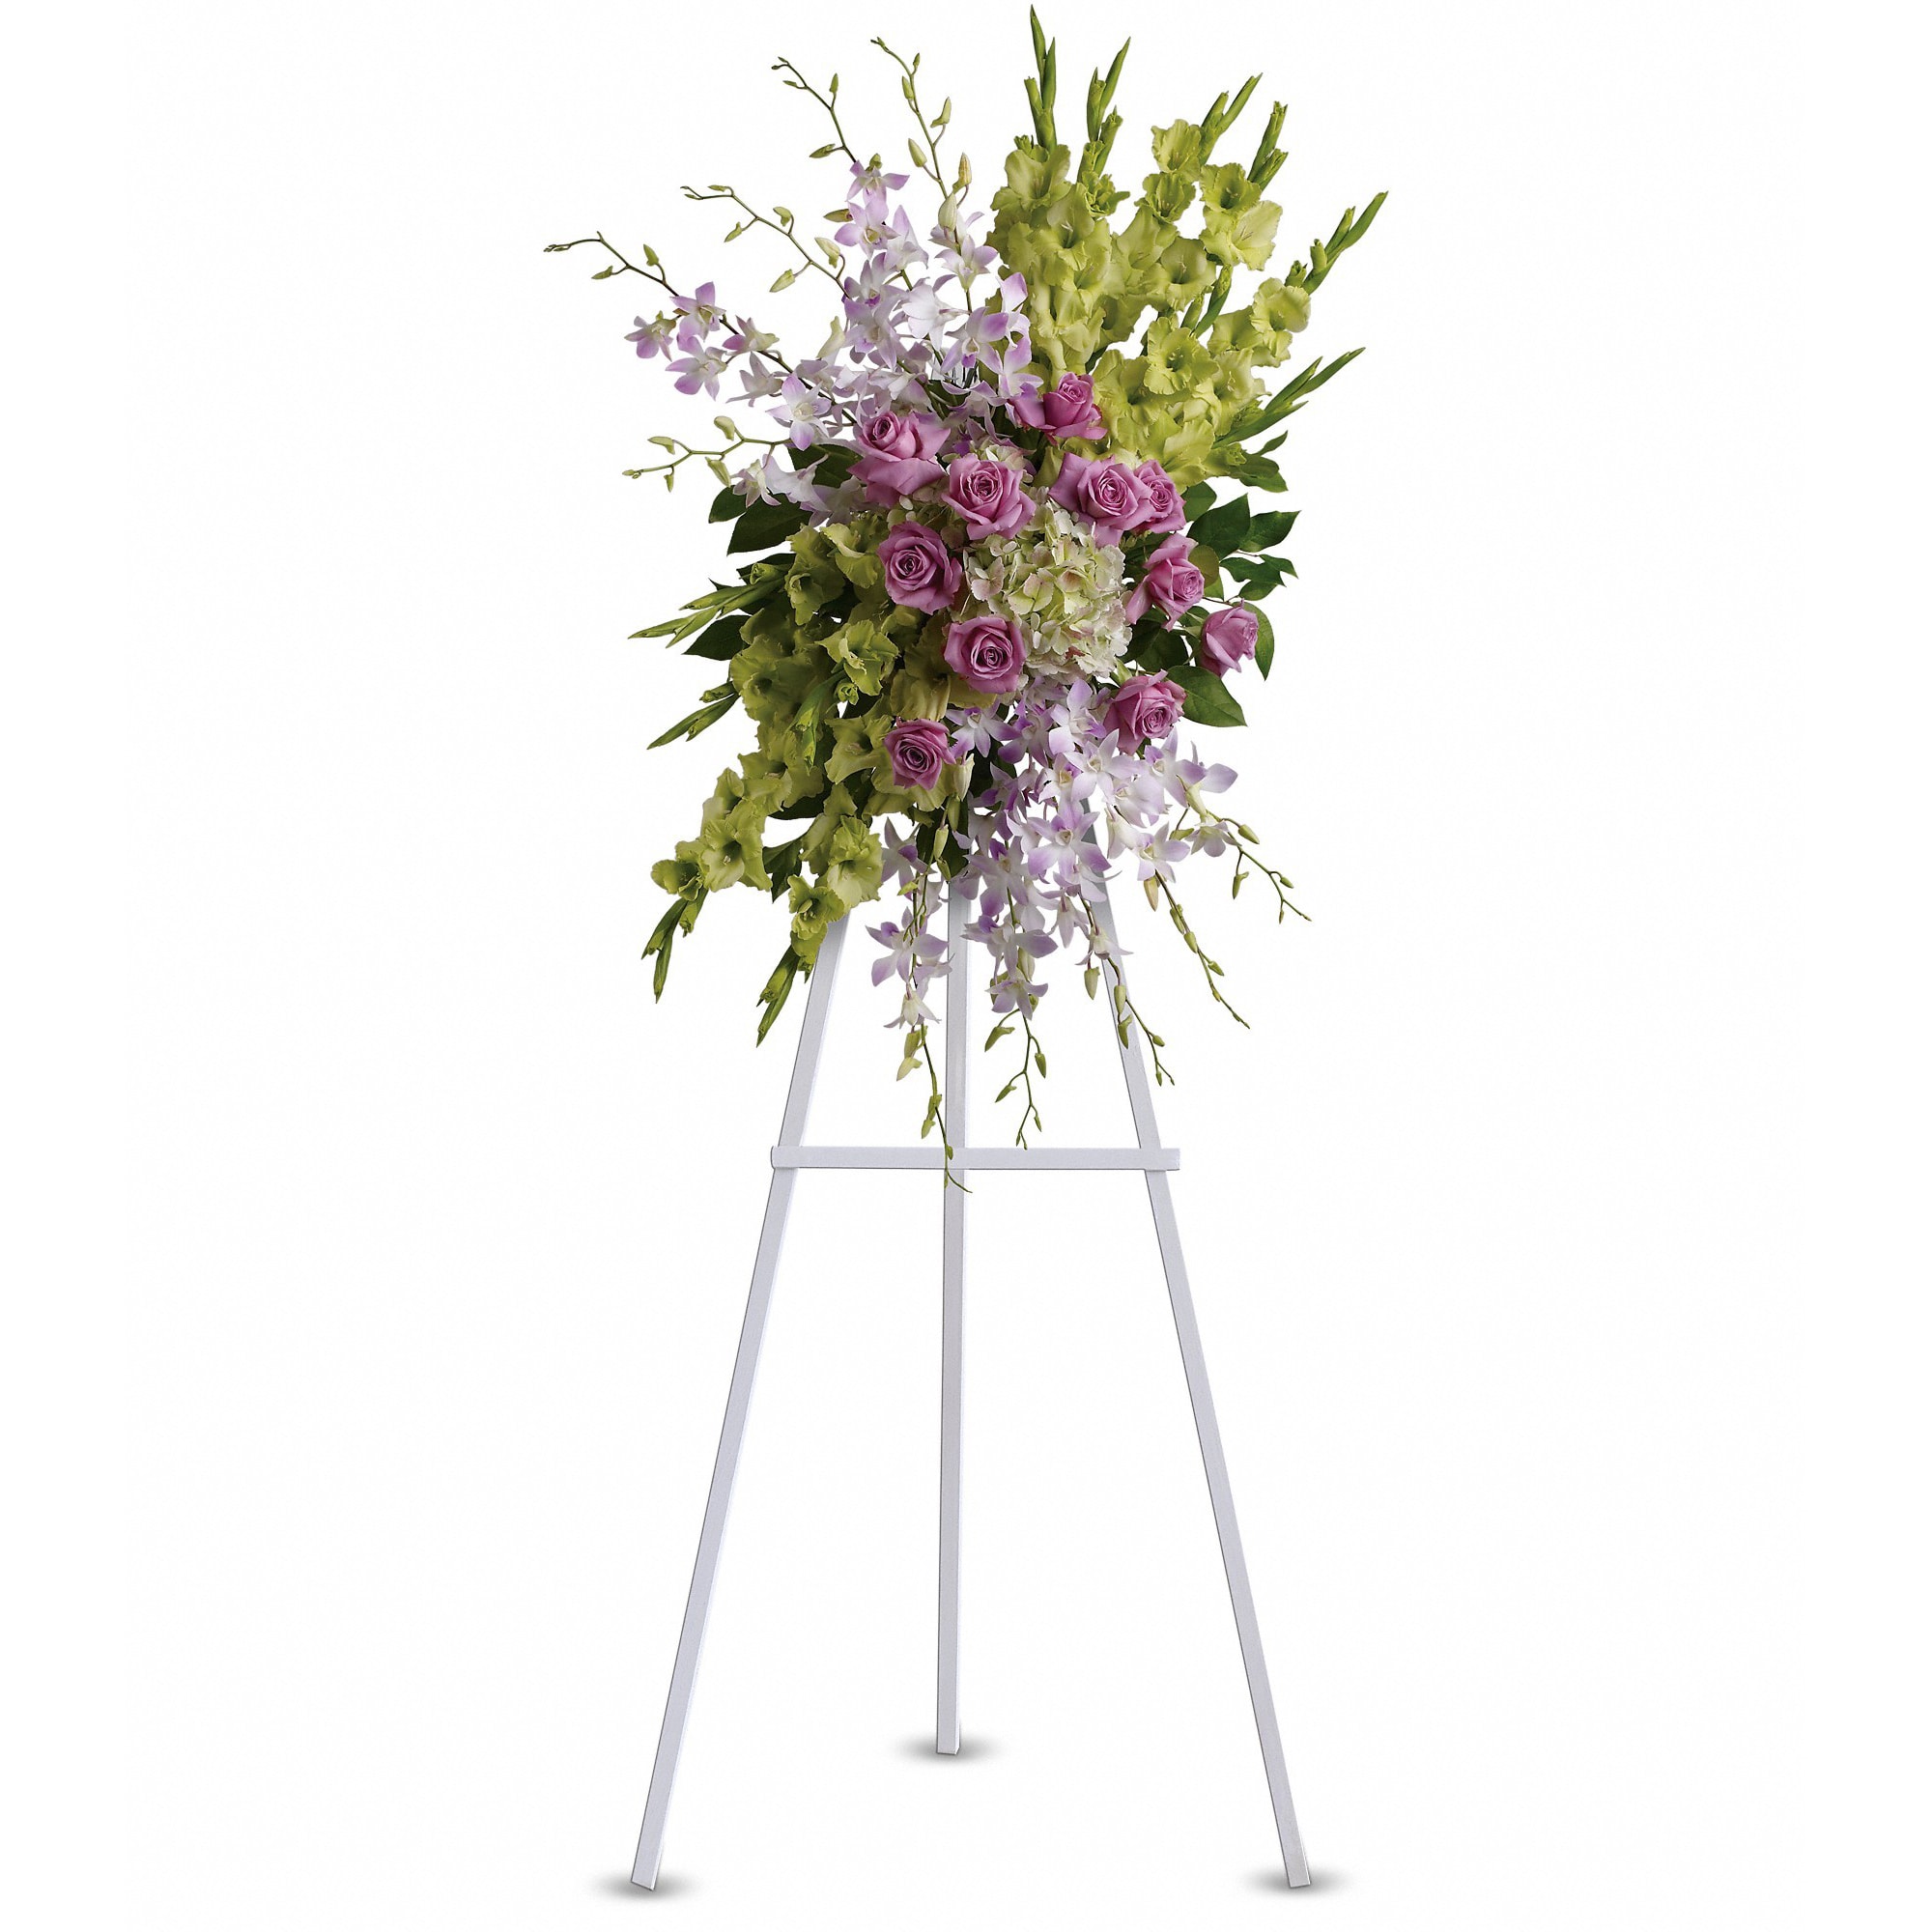 Heavenly Sentiments Spray by Teleflora - Fresh roses and opulent blooms such as orchids and gladioli - in celestial colors of green, purple and lavender - create a fine and appropriate floral standing spray. Send this gift as a representation of your thoughtfulness and devotion. 